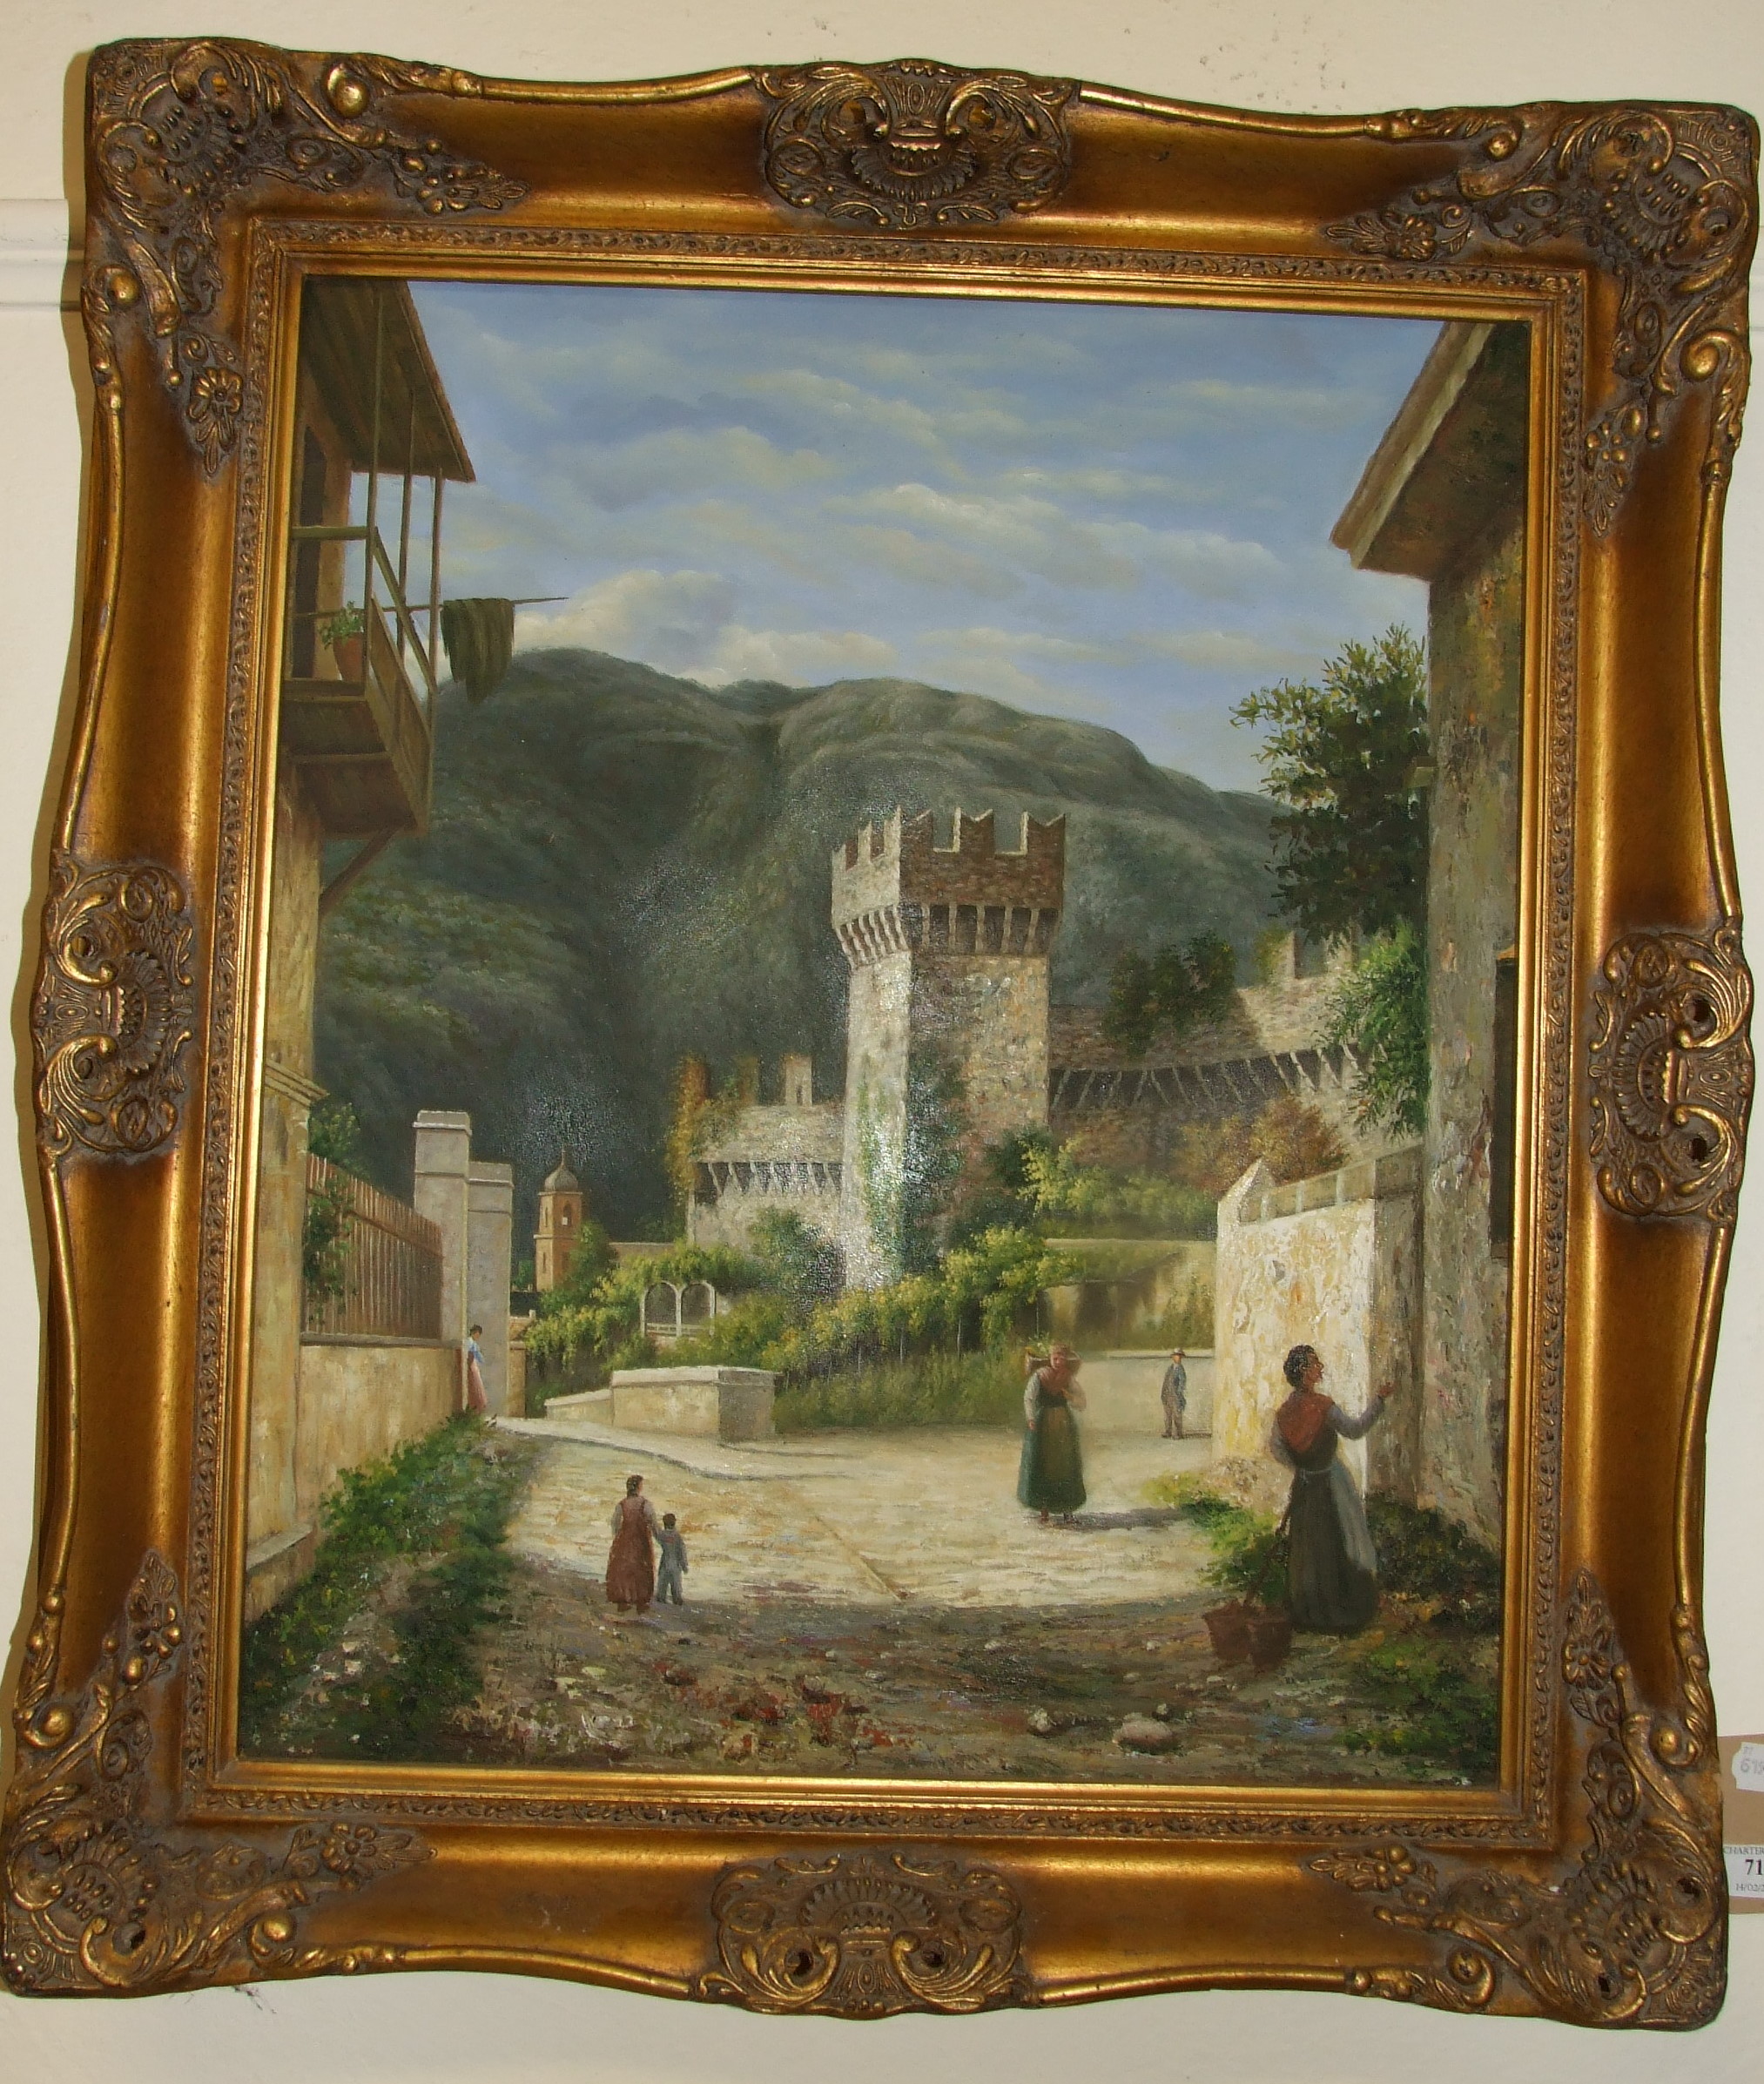 A picture of figures near a castellated city wall, 60 x 50 cm